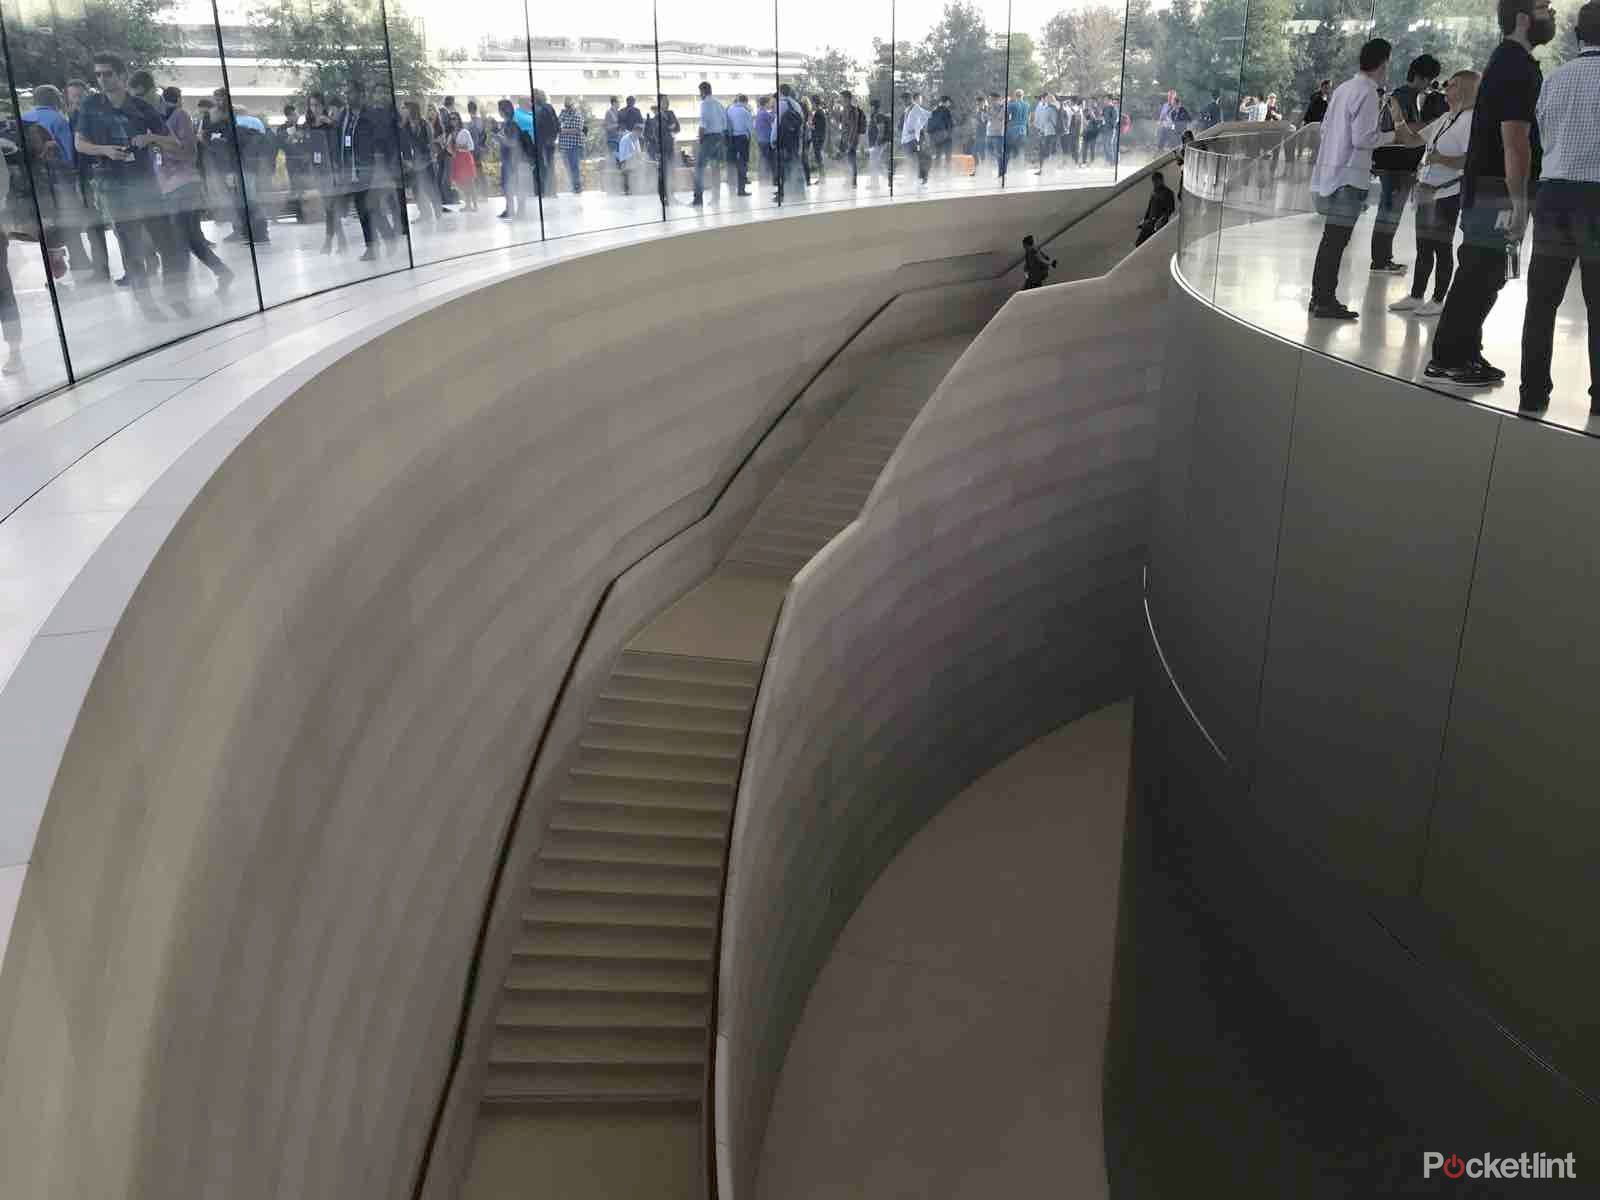 Apples Steve Jobs Theatre in pictures image 4